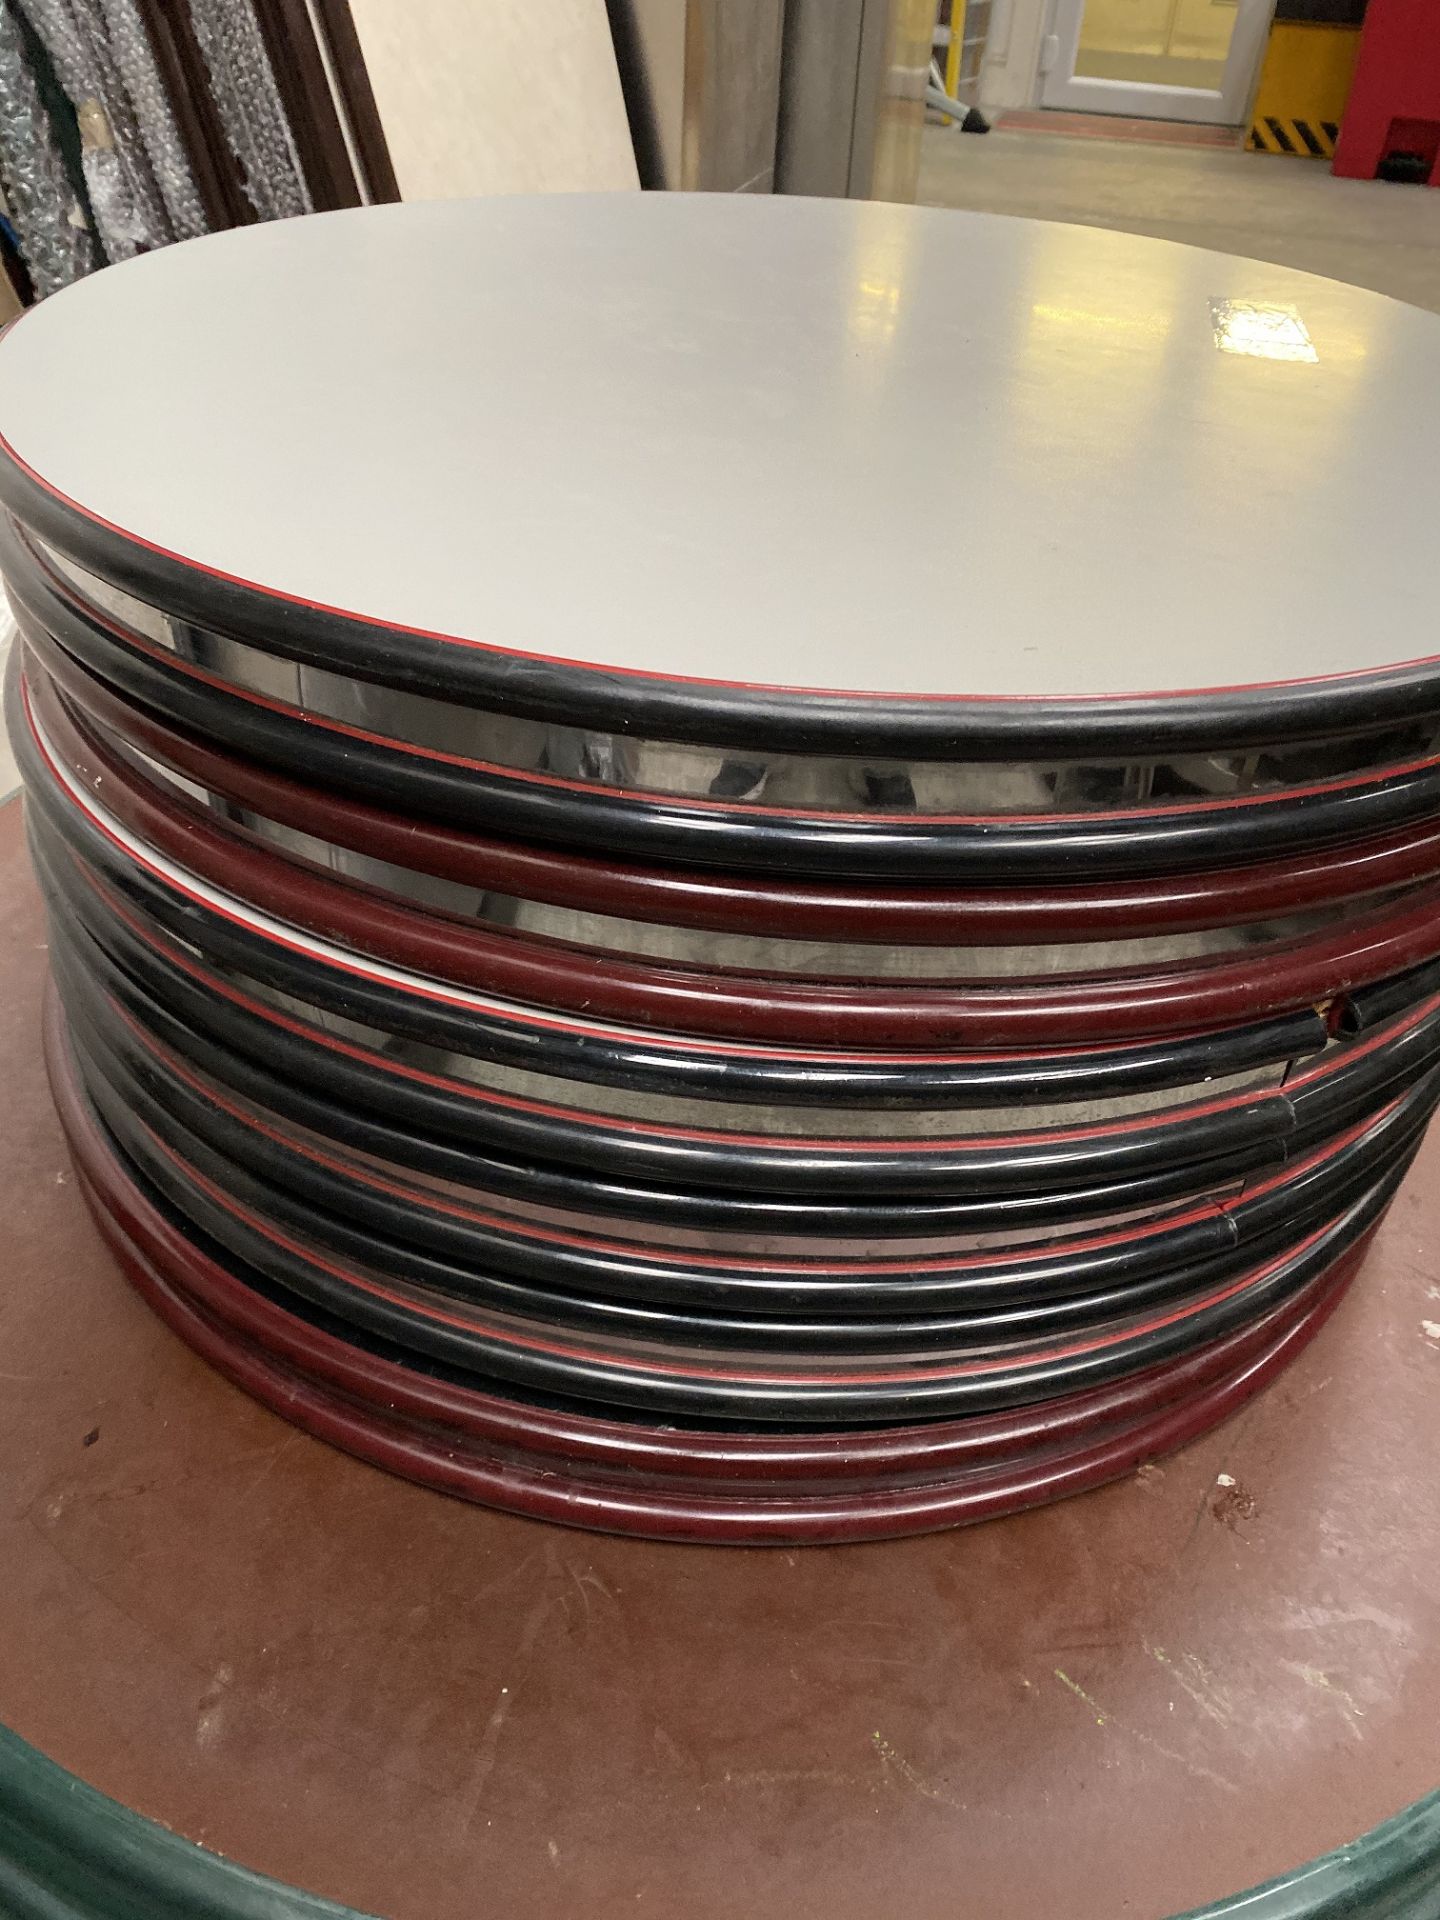 6 Heavy Duty Double Thick Round Table Tops, 760 mm Dia